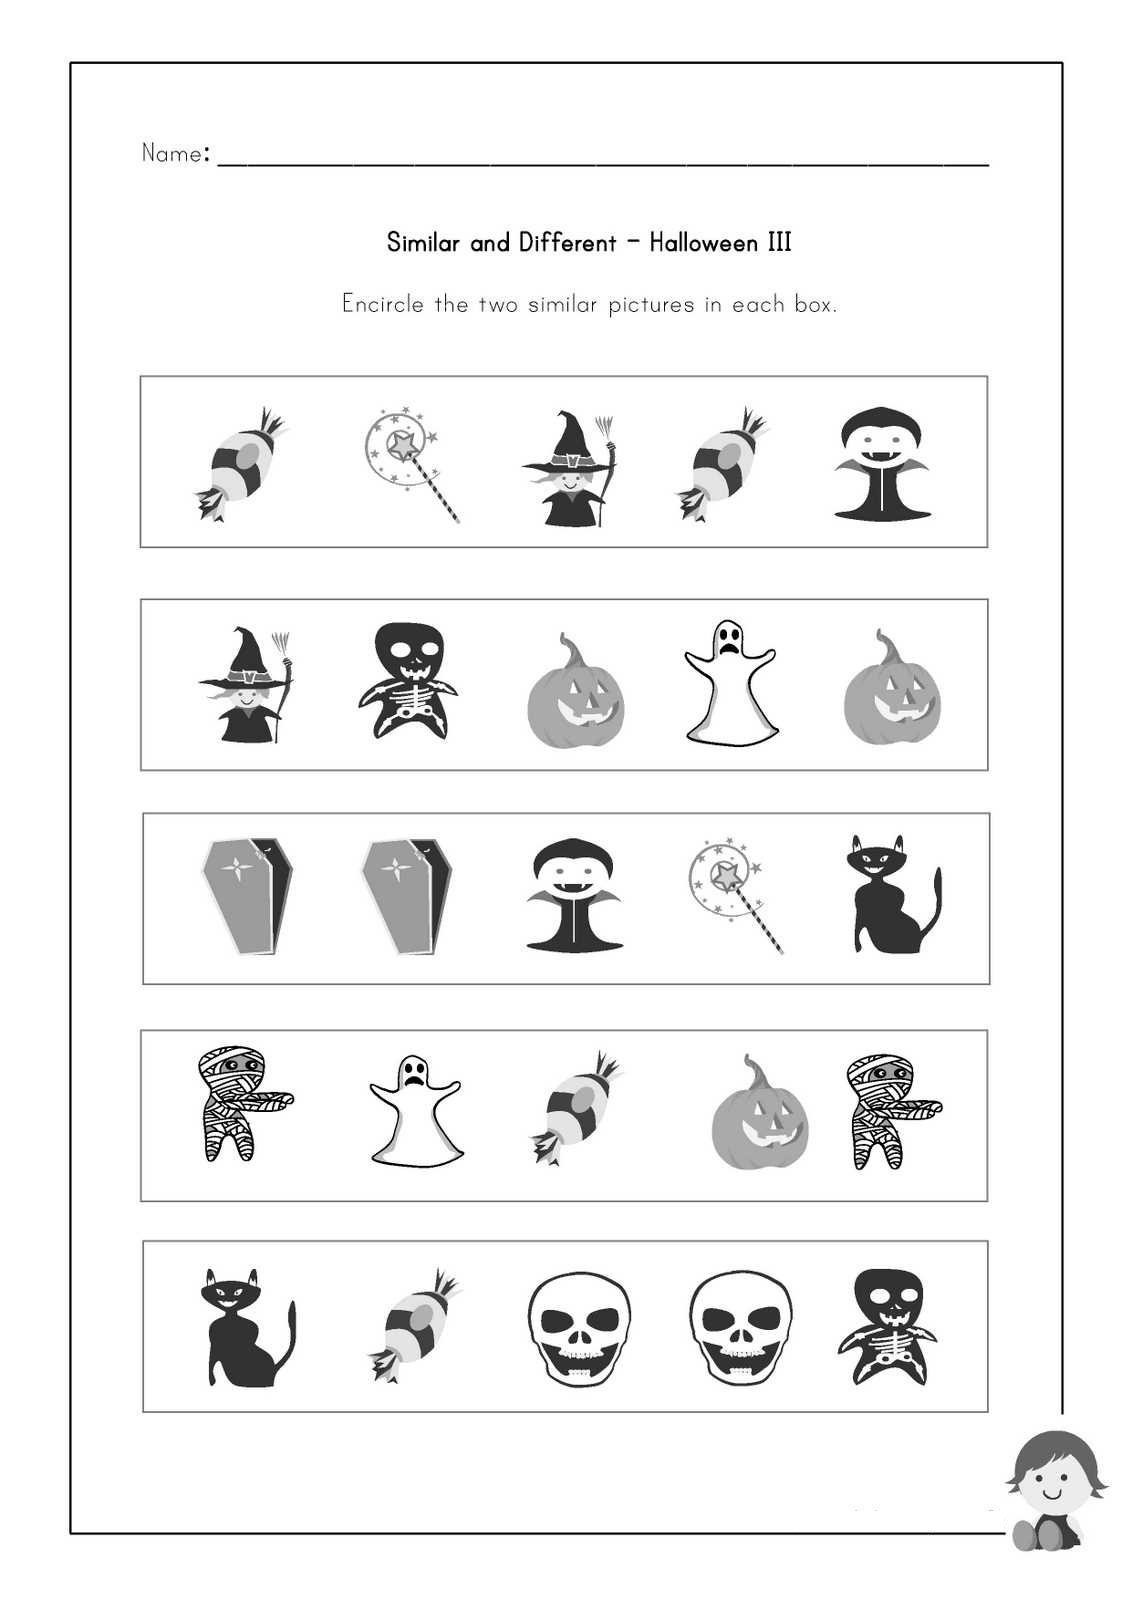 Same And Different Worksheets For Kids â Worksheets Samples